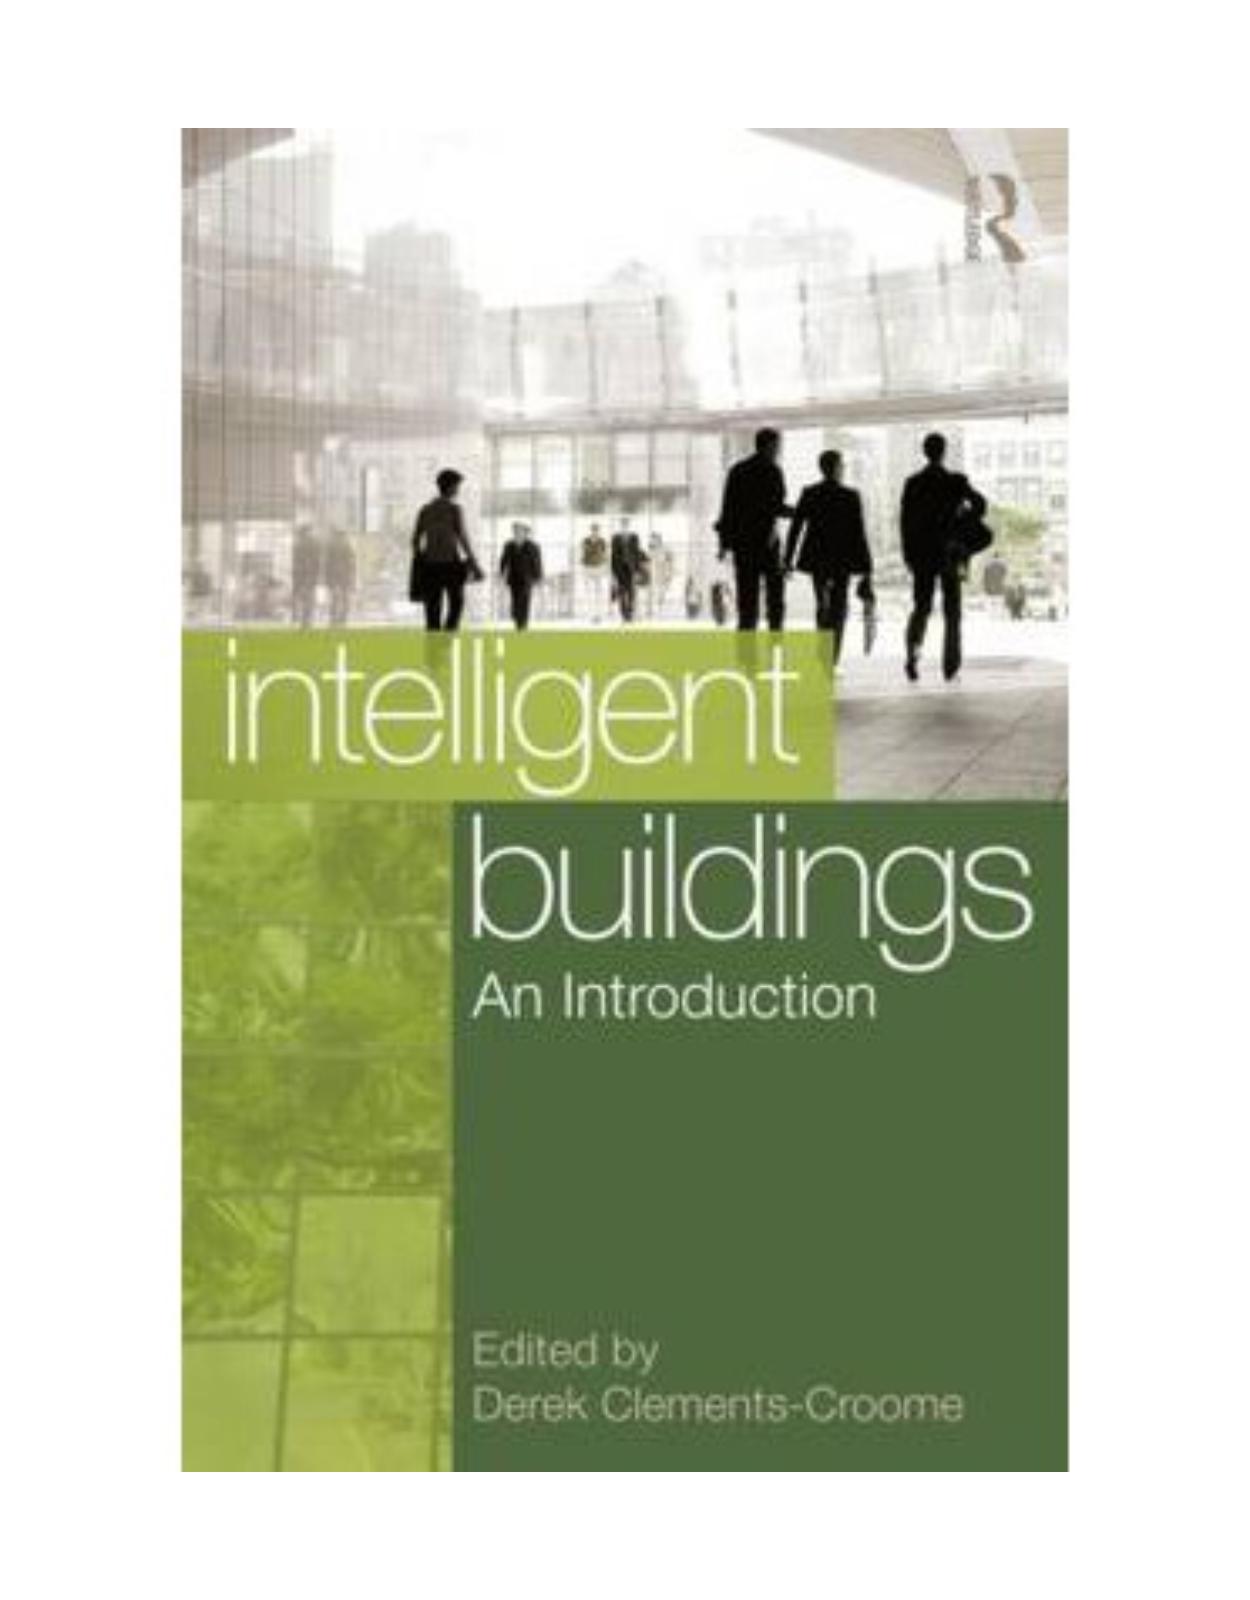 Intelligent buildings: an introduction